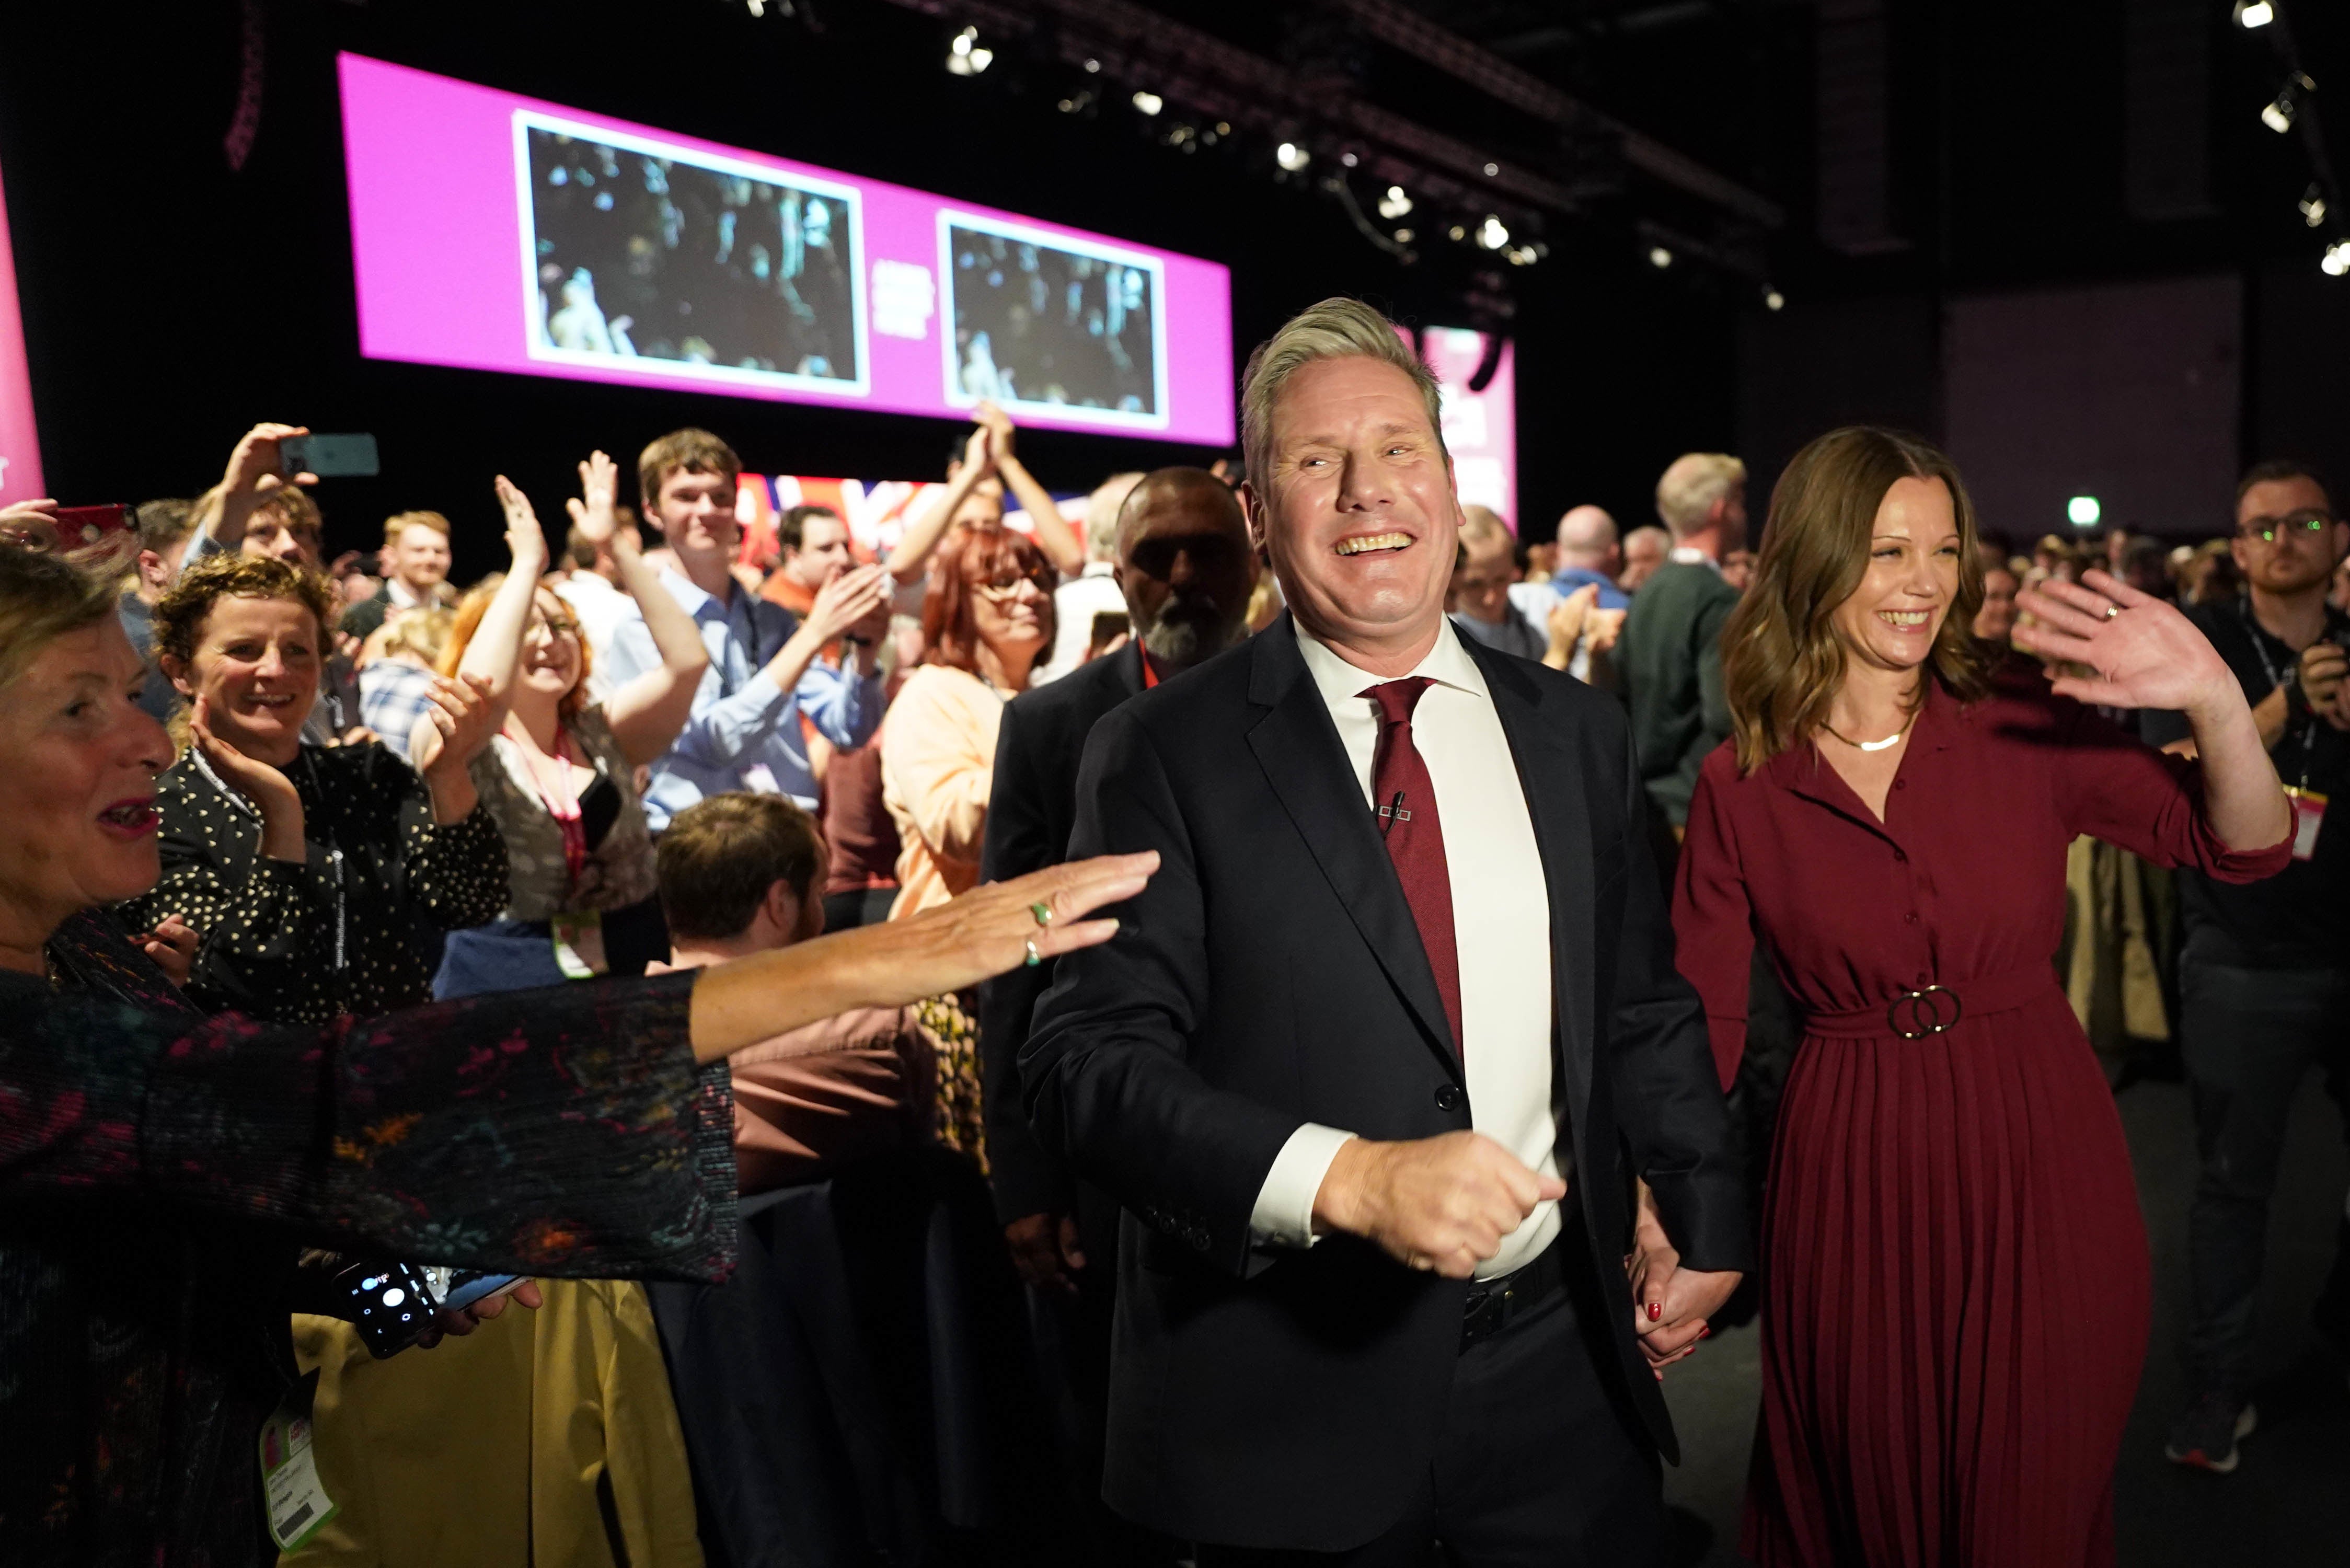 Labour Party leader Sir Keir Starmer, with his wife Victoria, leaves the stage after giving his keynote address during the party’s conference (Stefan Rousseau/PA)